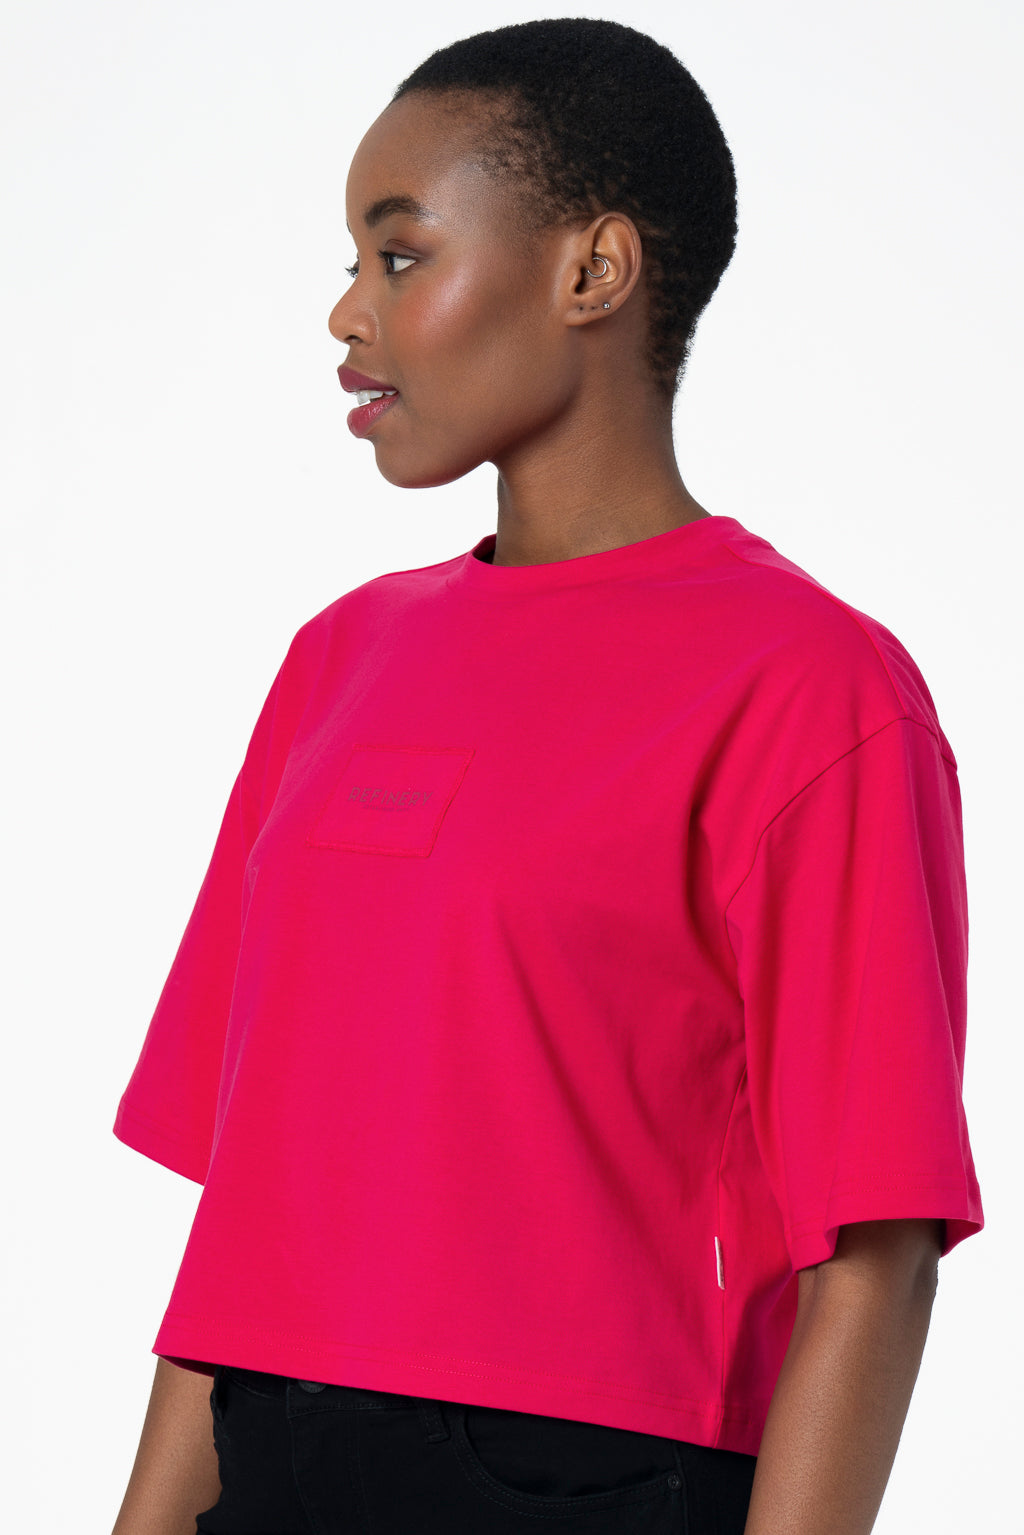 Boxy Branded T-Shirt _ 143192 _ Pink